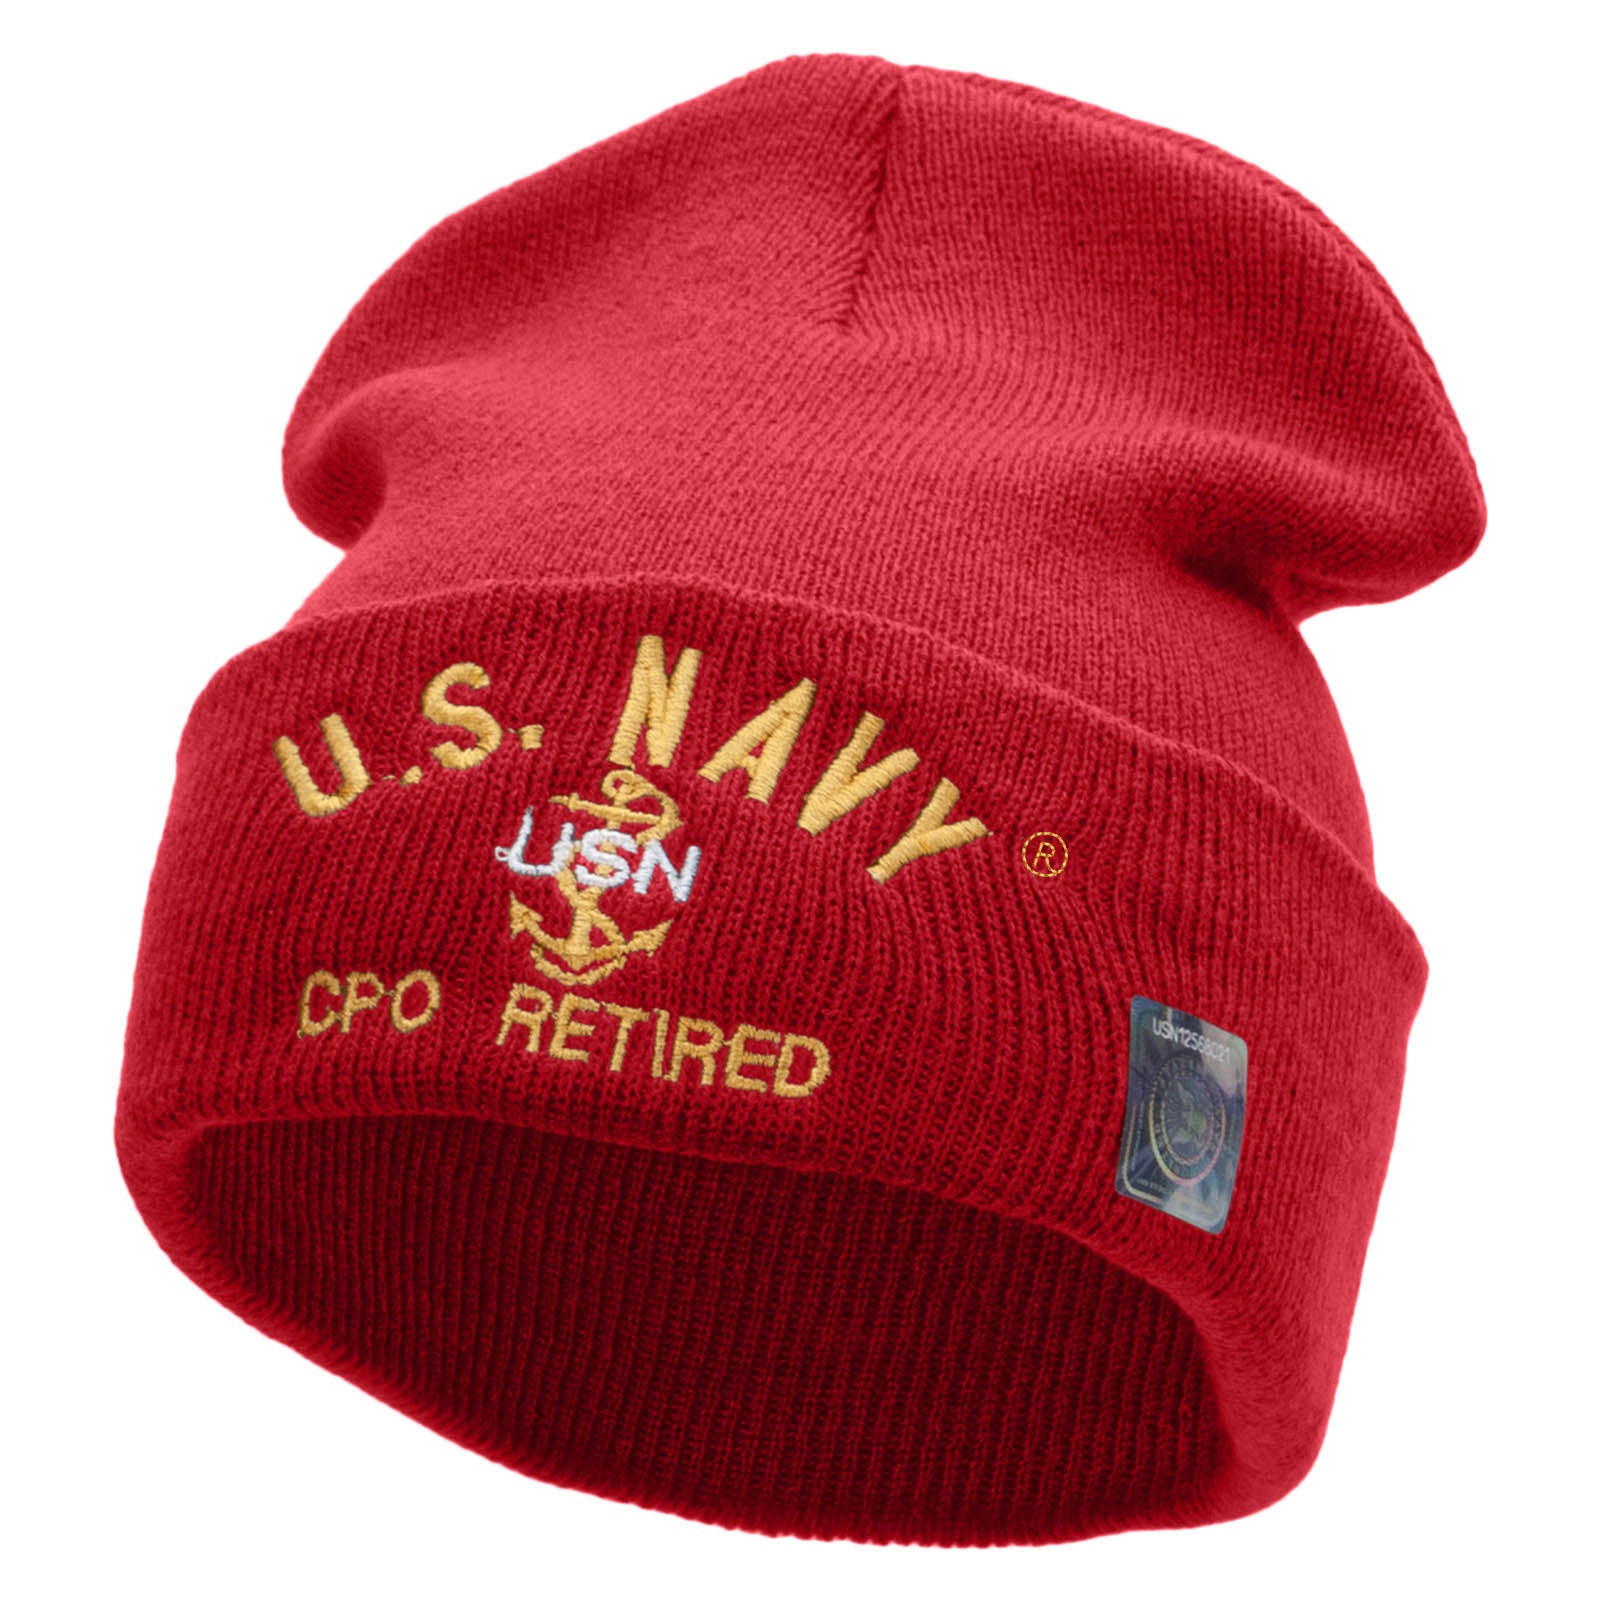 Licensed US Navy CPO Retired Military Embroidered Long Beanie Made in USA - Red OSFM